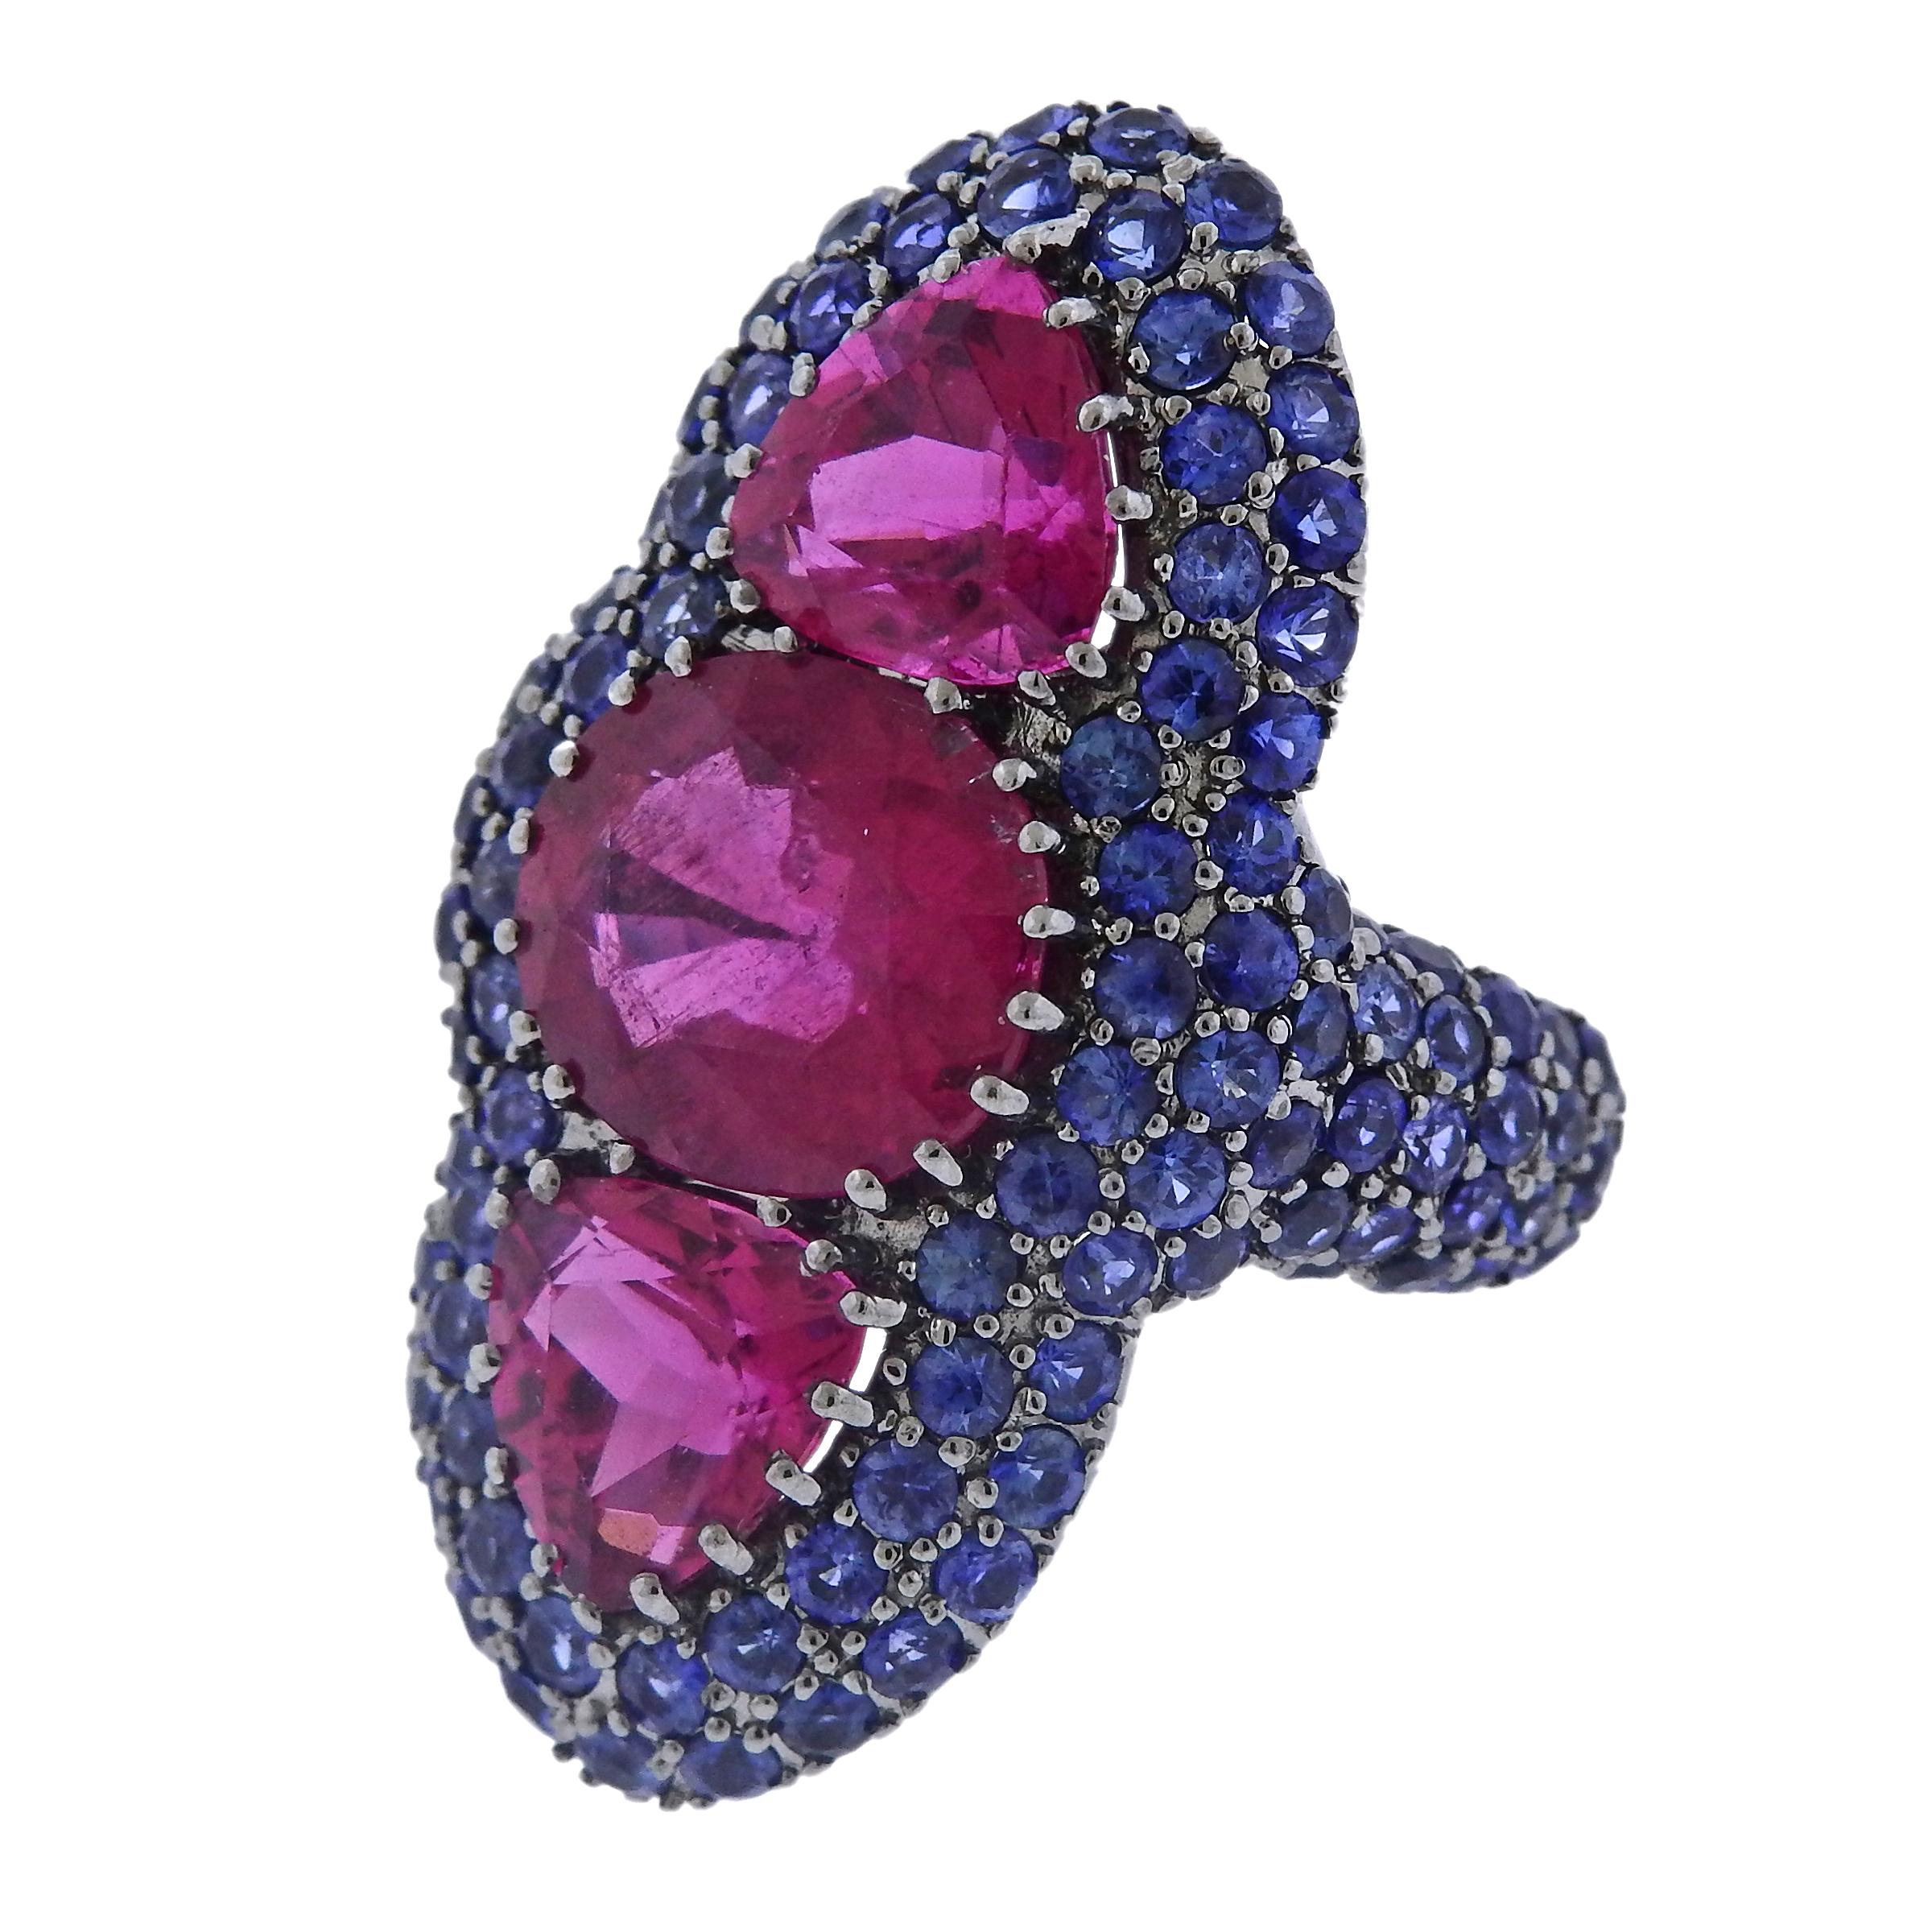 18k blackened white gold cocktail ring, decorated with blue sapphires and pink tourmalines. Ring size - 4.75, ring top - 34mm wide and weighs 13 grams. Marked 750. 